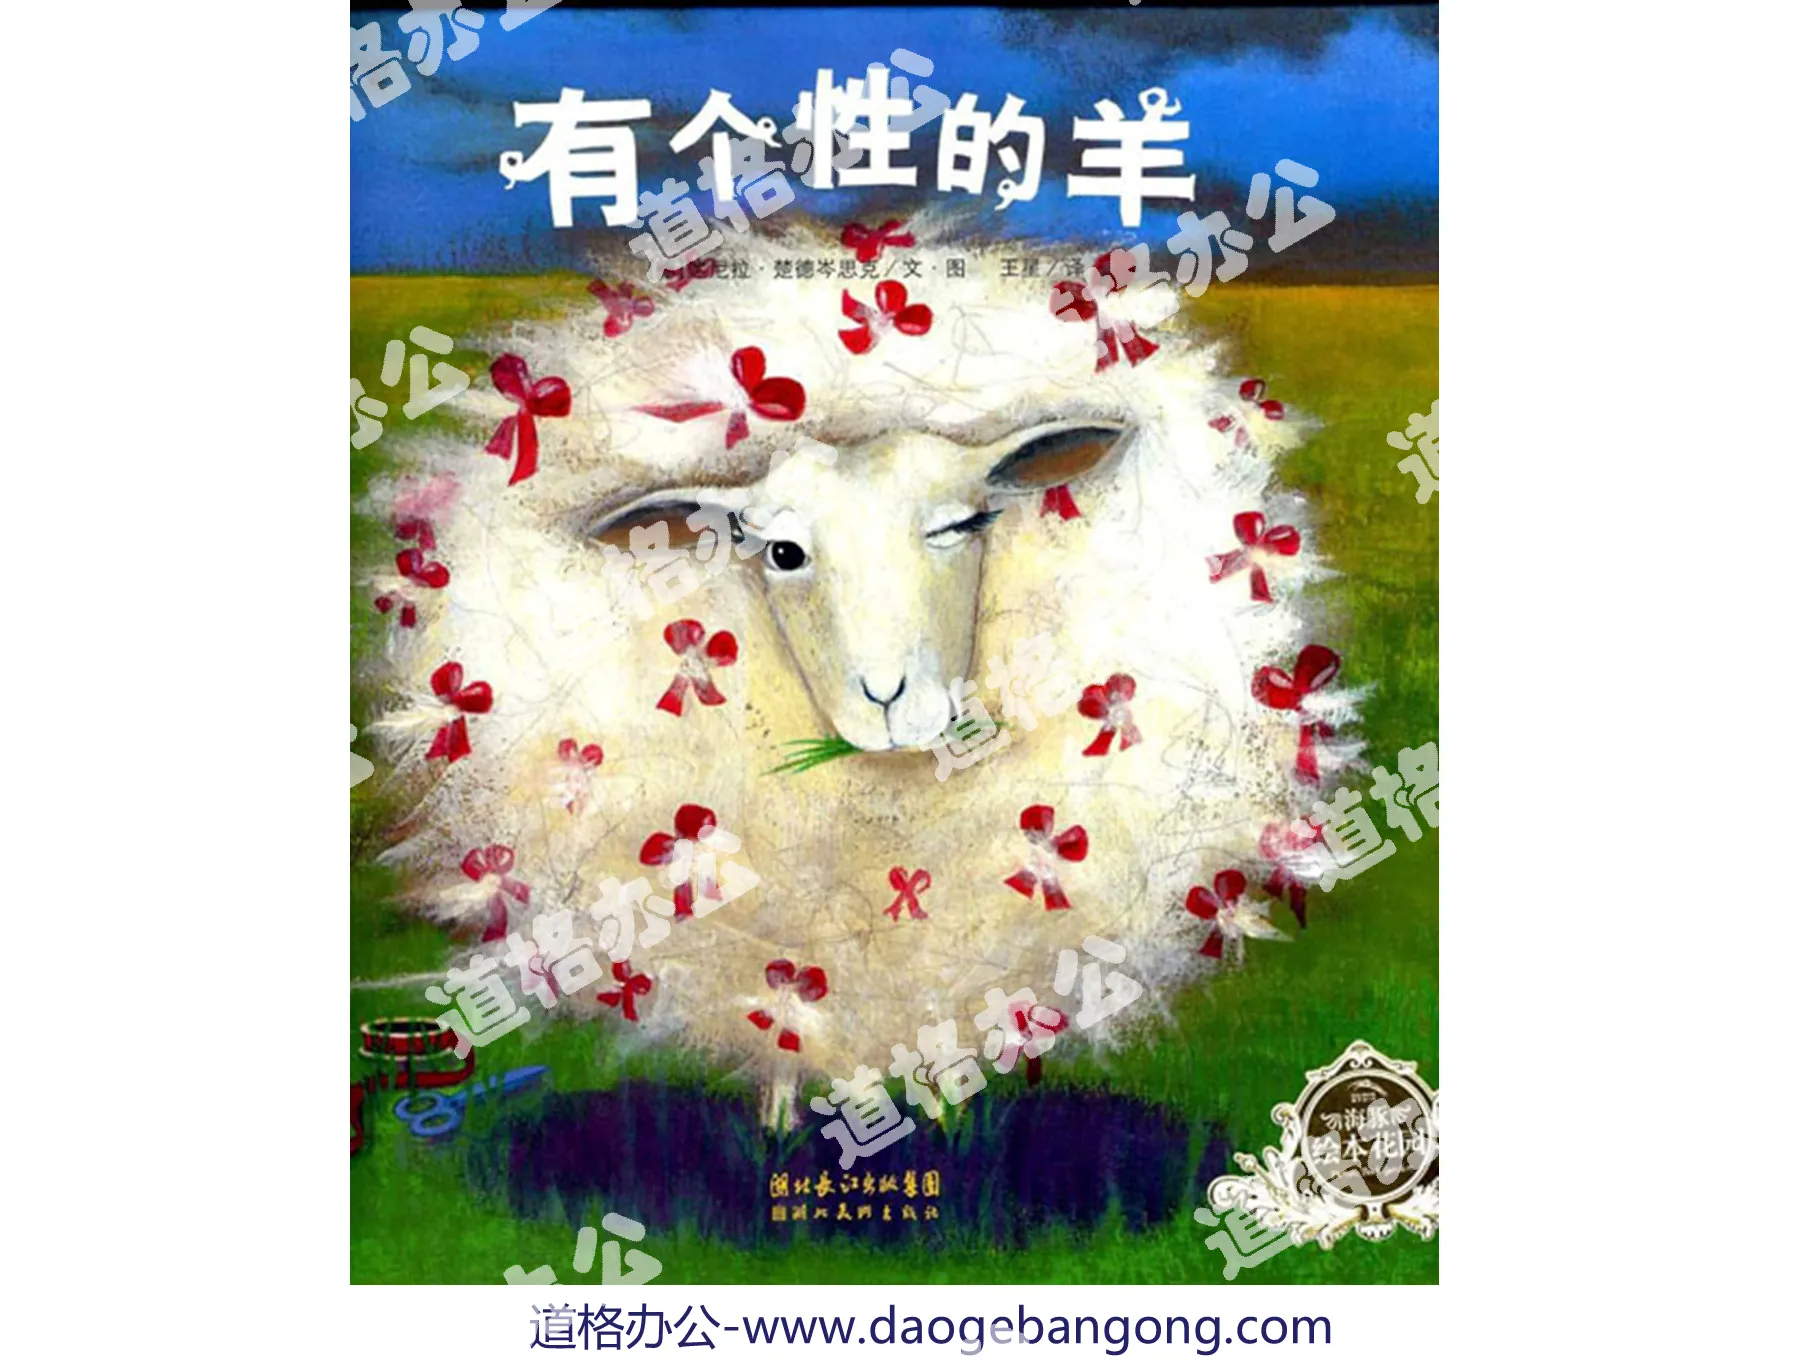 "The Sheep with Personality" picture book story PPT